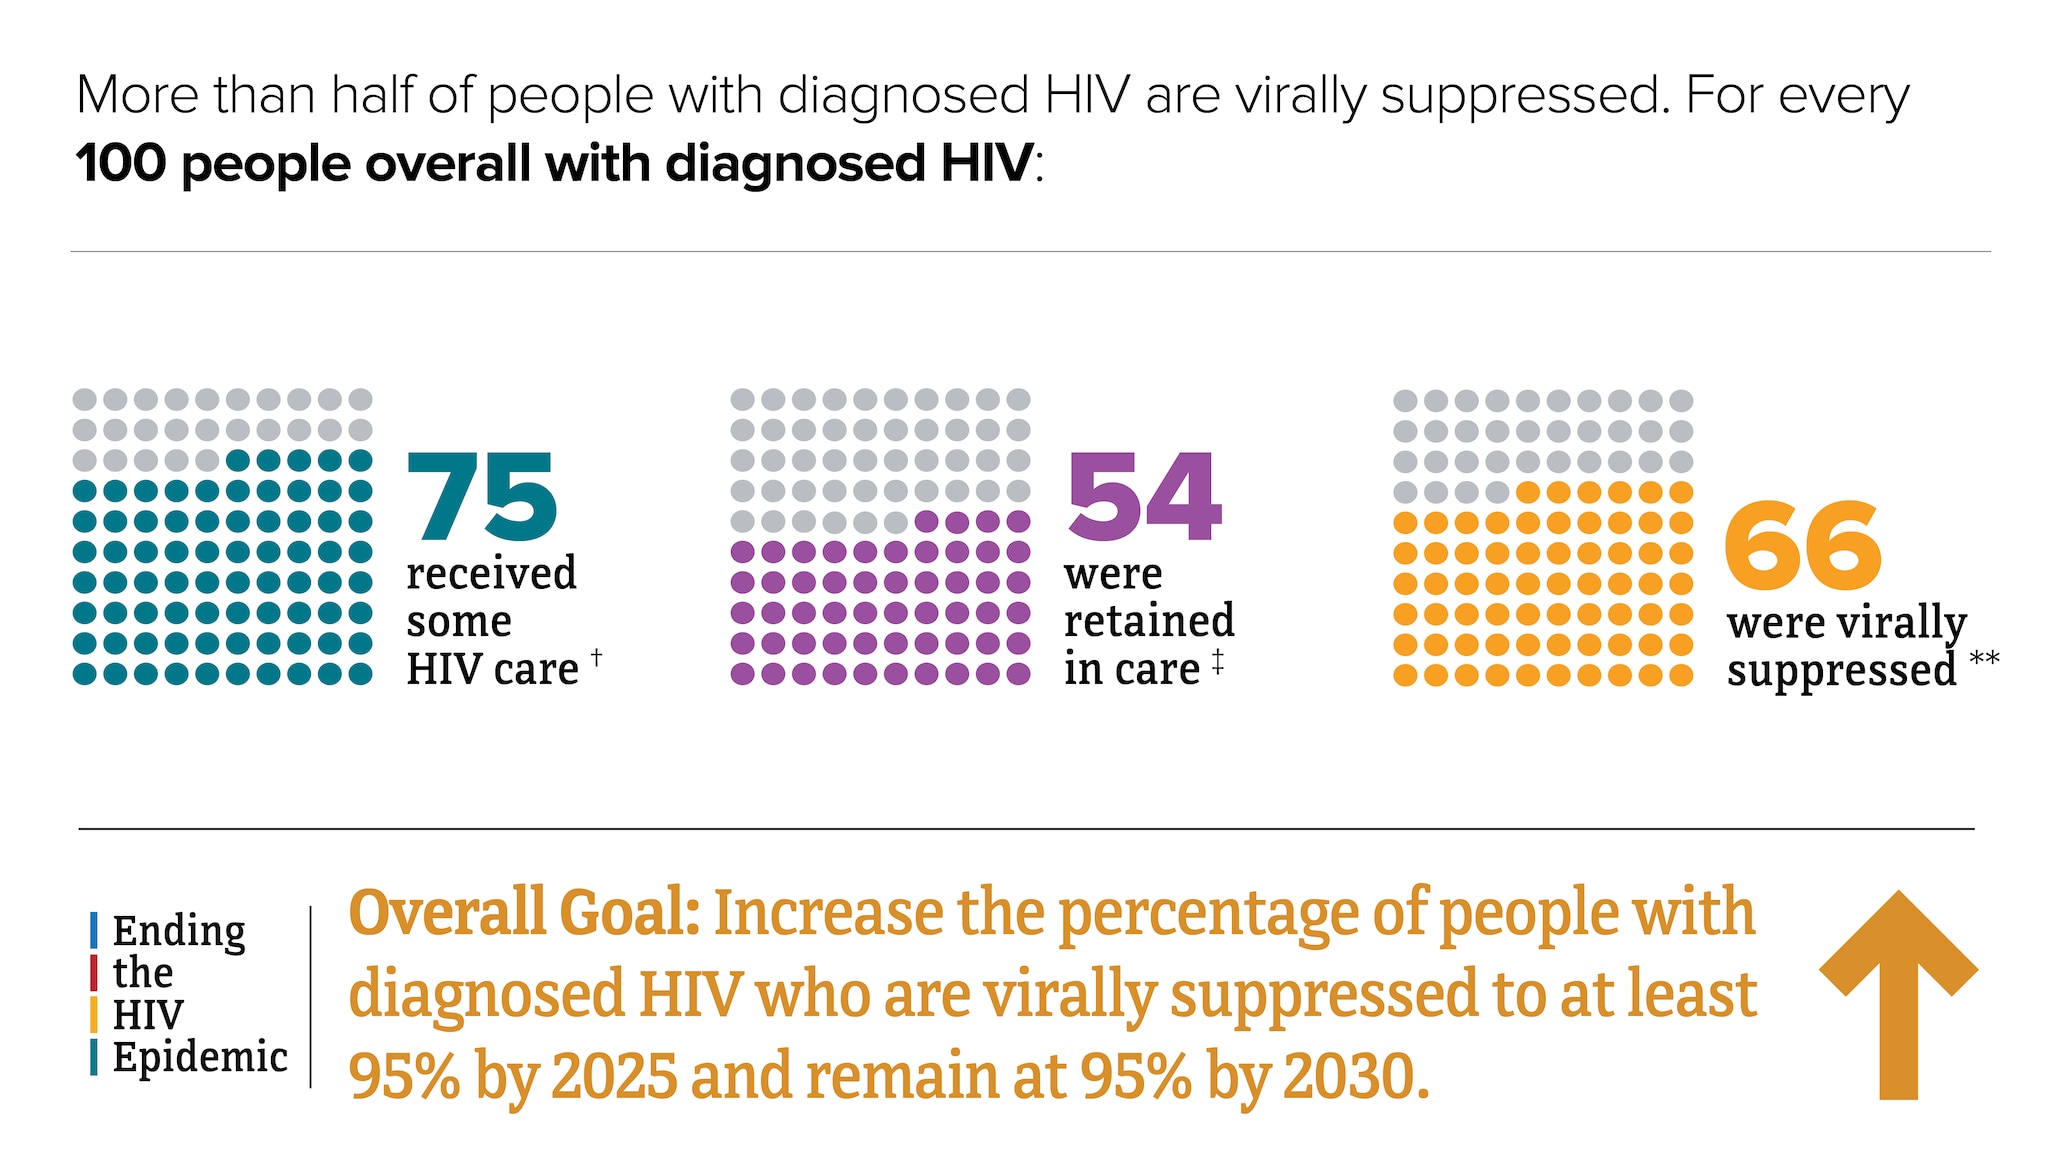 More than half of people with diagnosed HIV are virally suppressed. For every 100 people overall with diagnosed HIV, 75 received some HIV care, 54 were retained in care, and 66 were virally suppressed. The Ending the HIV Epidemic overall goal is to increase the percentage of people with diagnosed HIV who are virally suppressed to at least 95 percent by 2025 and remain at 95 percent by 2030.